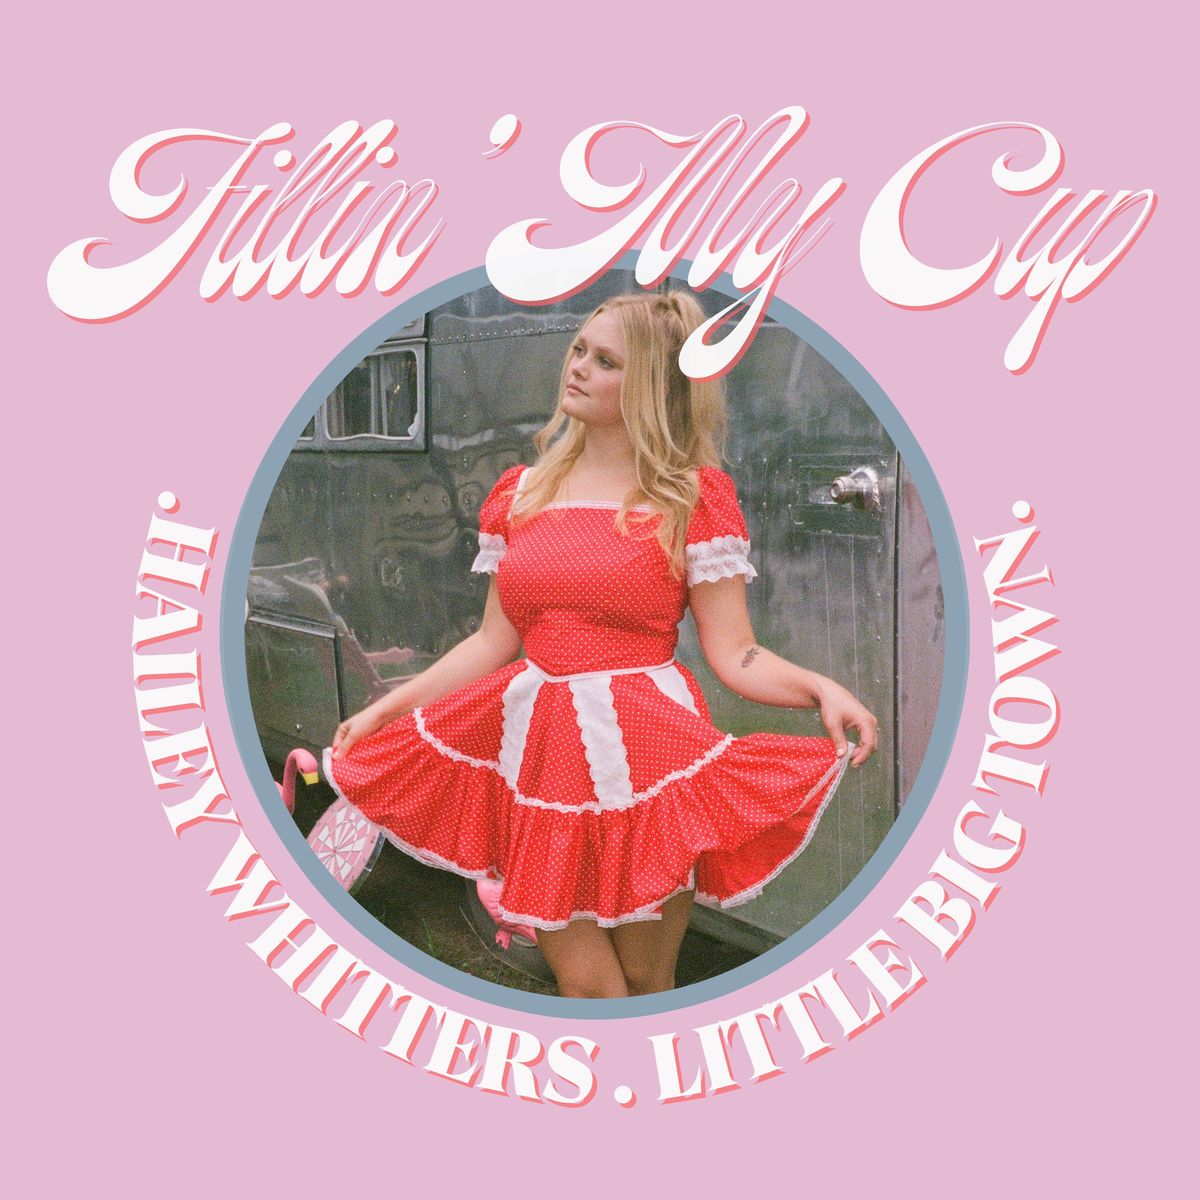 Hailey Whitters ft Little Big Town - Fillin' My Cup